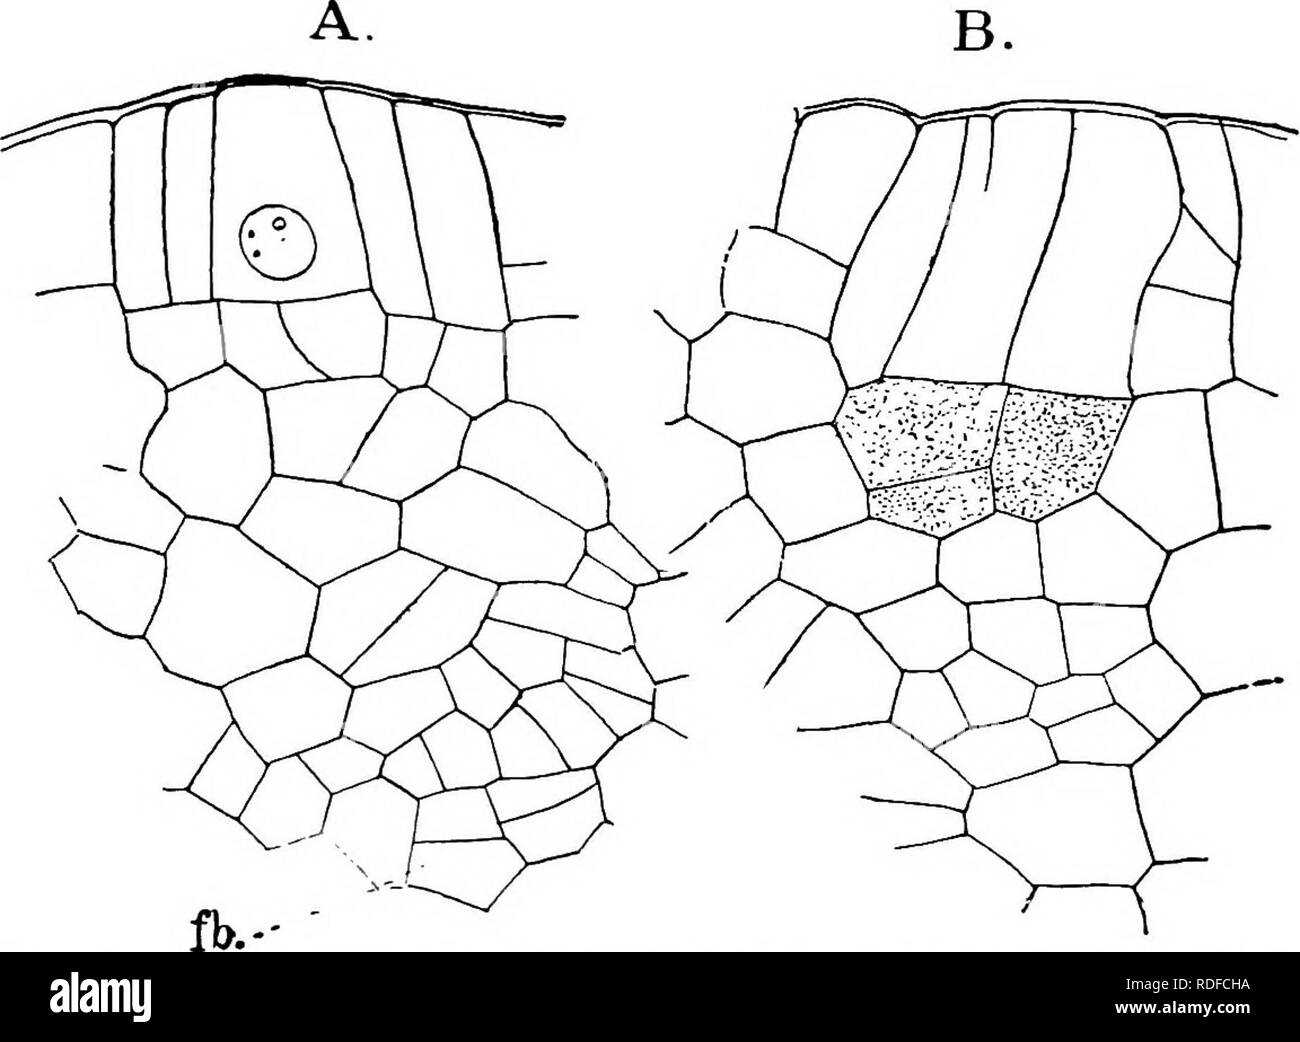 . The structure and development of mosses and ferns (Archegoniatae). Plant morphology; Mosses; Ferns. VII PTERIDOPHYTA—FILICINEM—OPHIOGLOSSACE^ 255 arate an inner archesporium from the outer cells, destined to form the wall of the sporangium. Between the young spo- rangia the cells form sterile septa. The cell-groups which form archesporia, and those which develop into sterile septa, are sister-cell groups. All of the sporogenous tissue cannot be traced back to the primary archesporial cell, as later secondary sporogenous tissue may be formed by further periclinal divisions in the outer cells  Stock Photo